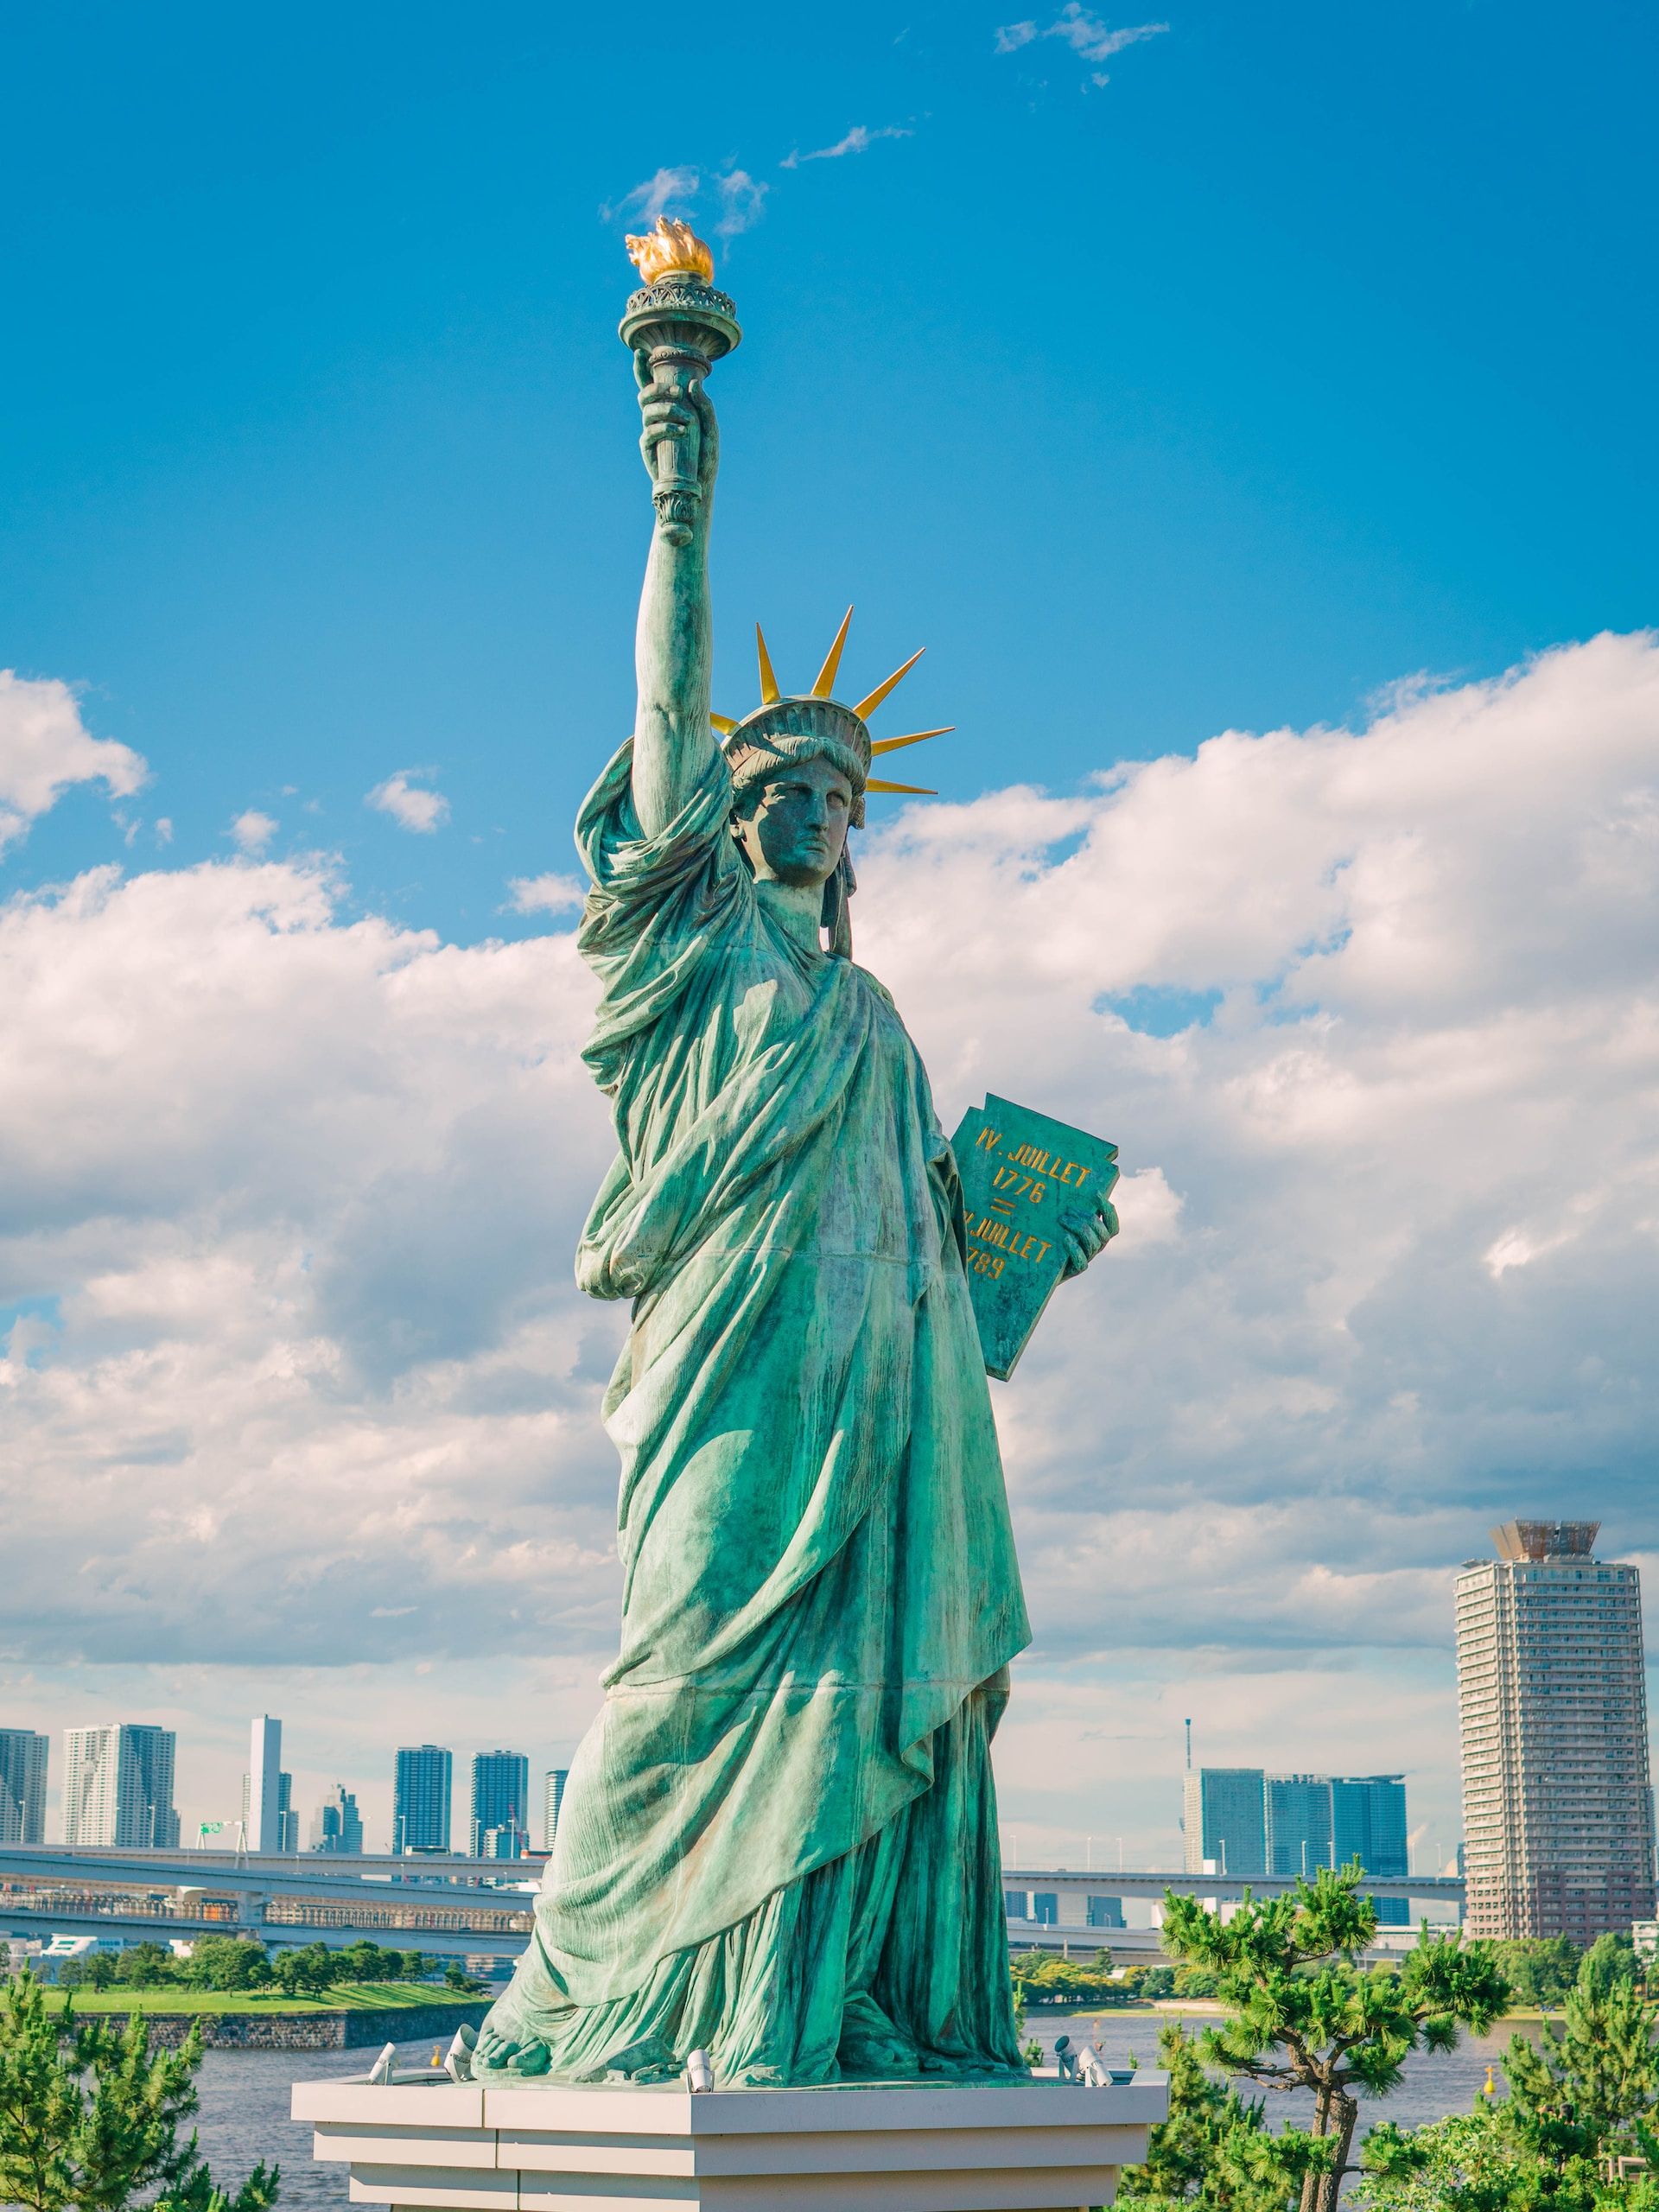 A view of the Statue of Liberty in New York City